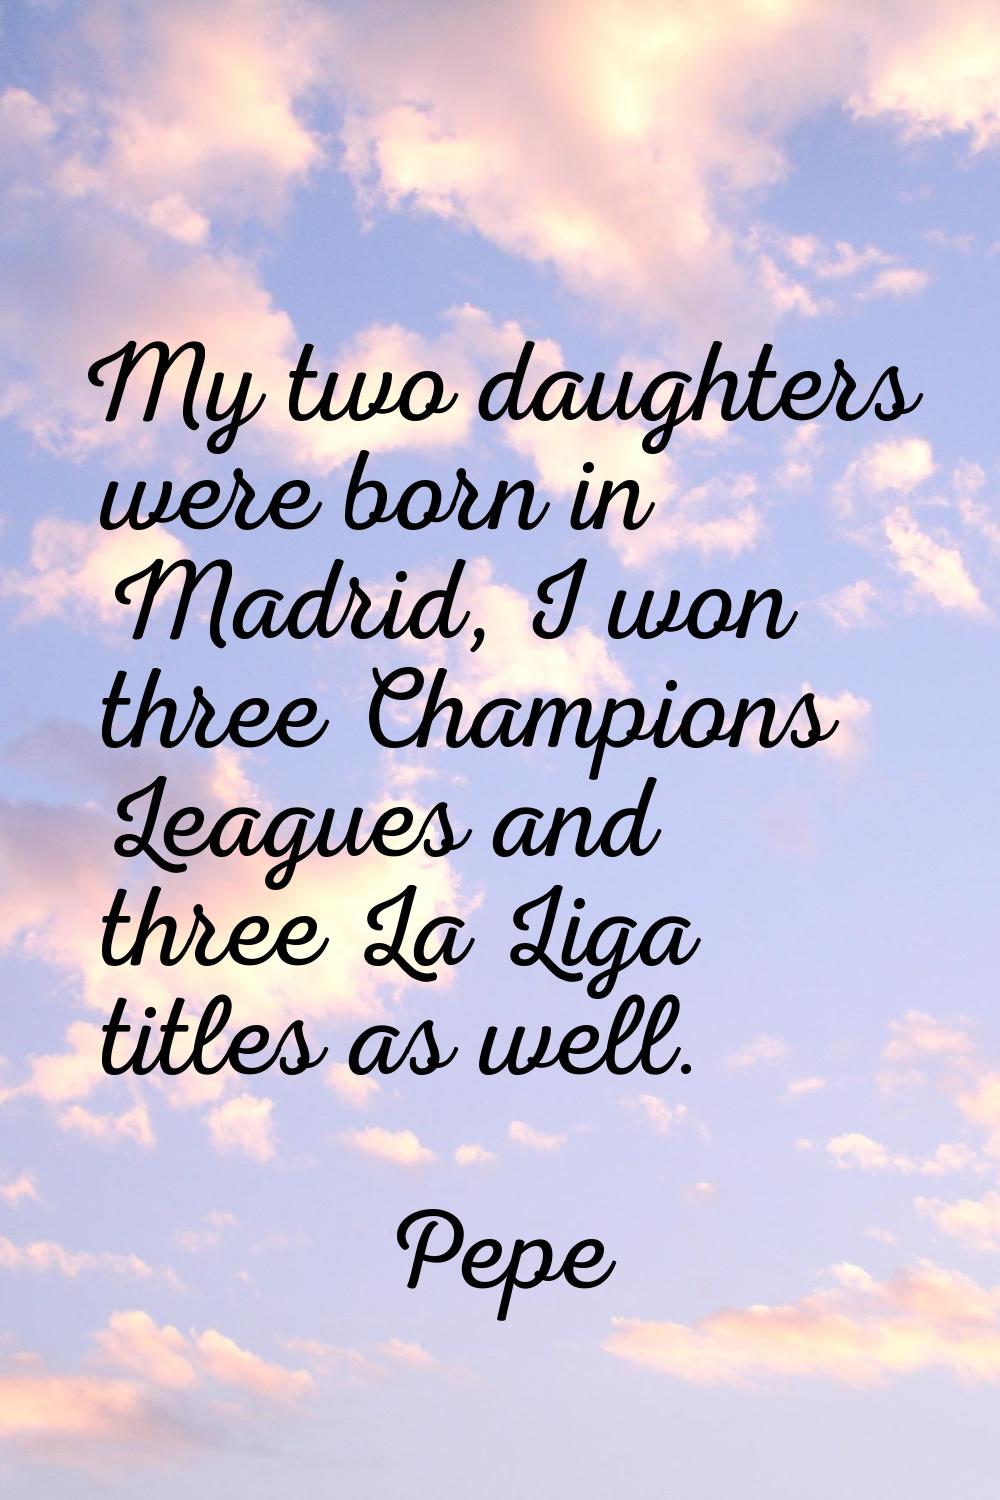 My two daughters were born in Madrid, I won three Champions Leagues and three La Liga titles as wel